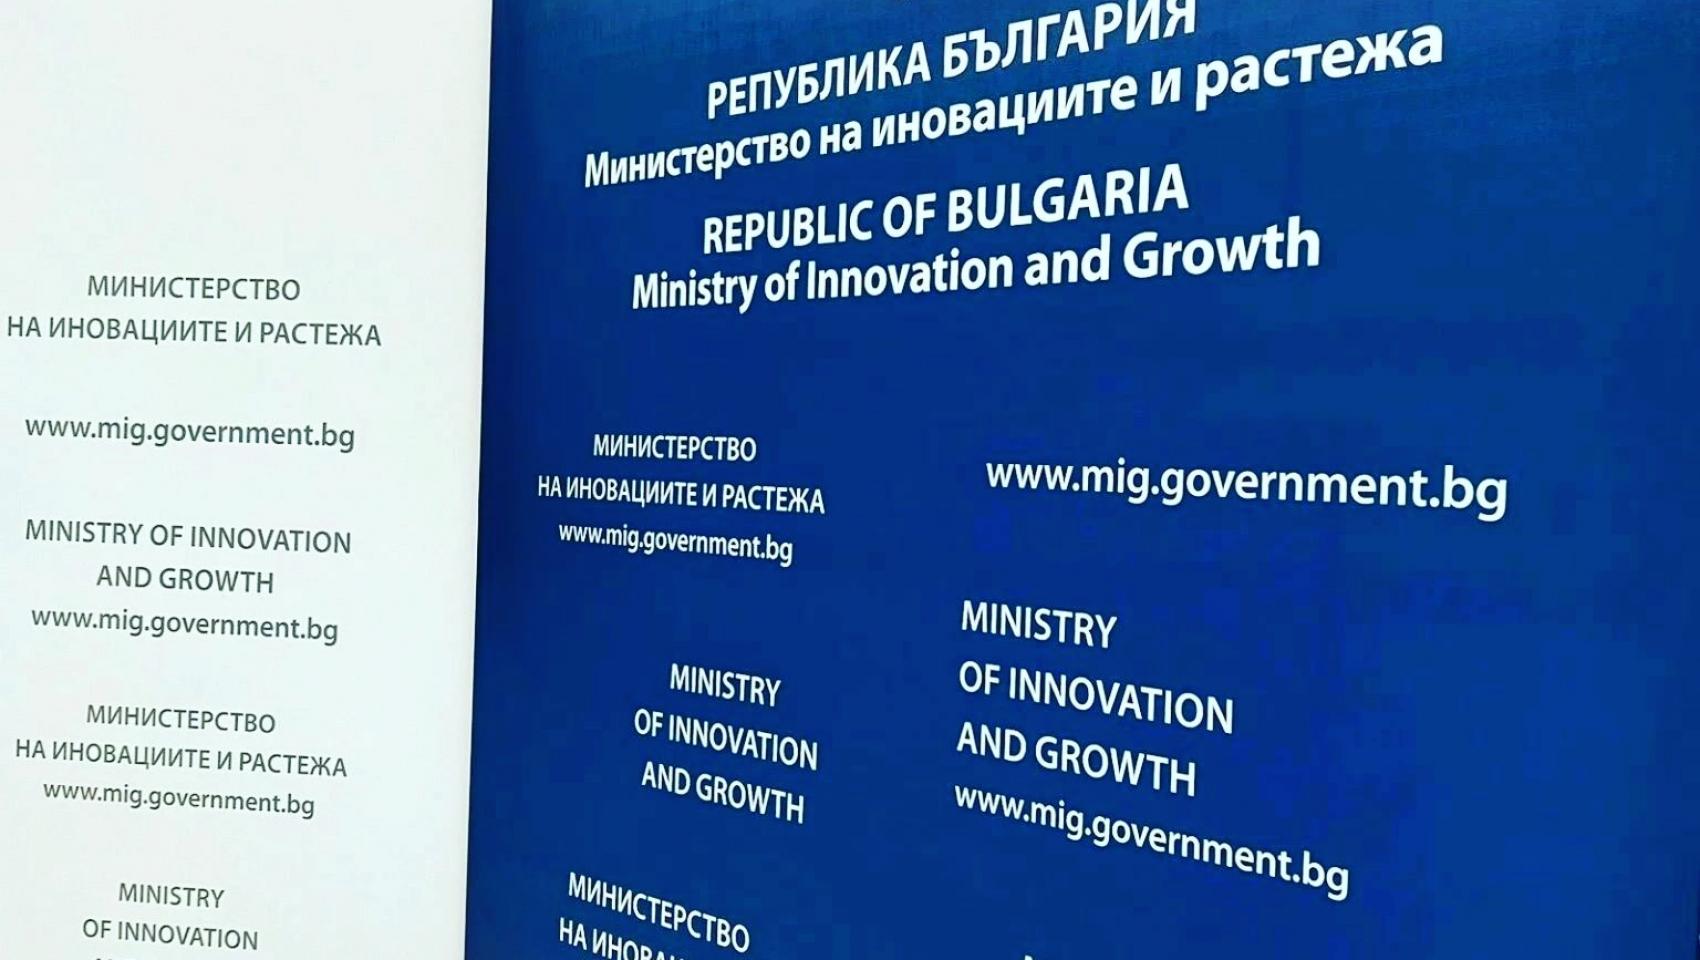 The Ministry of Innovation and Growth (MIG) will support the